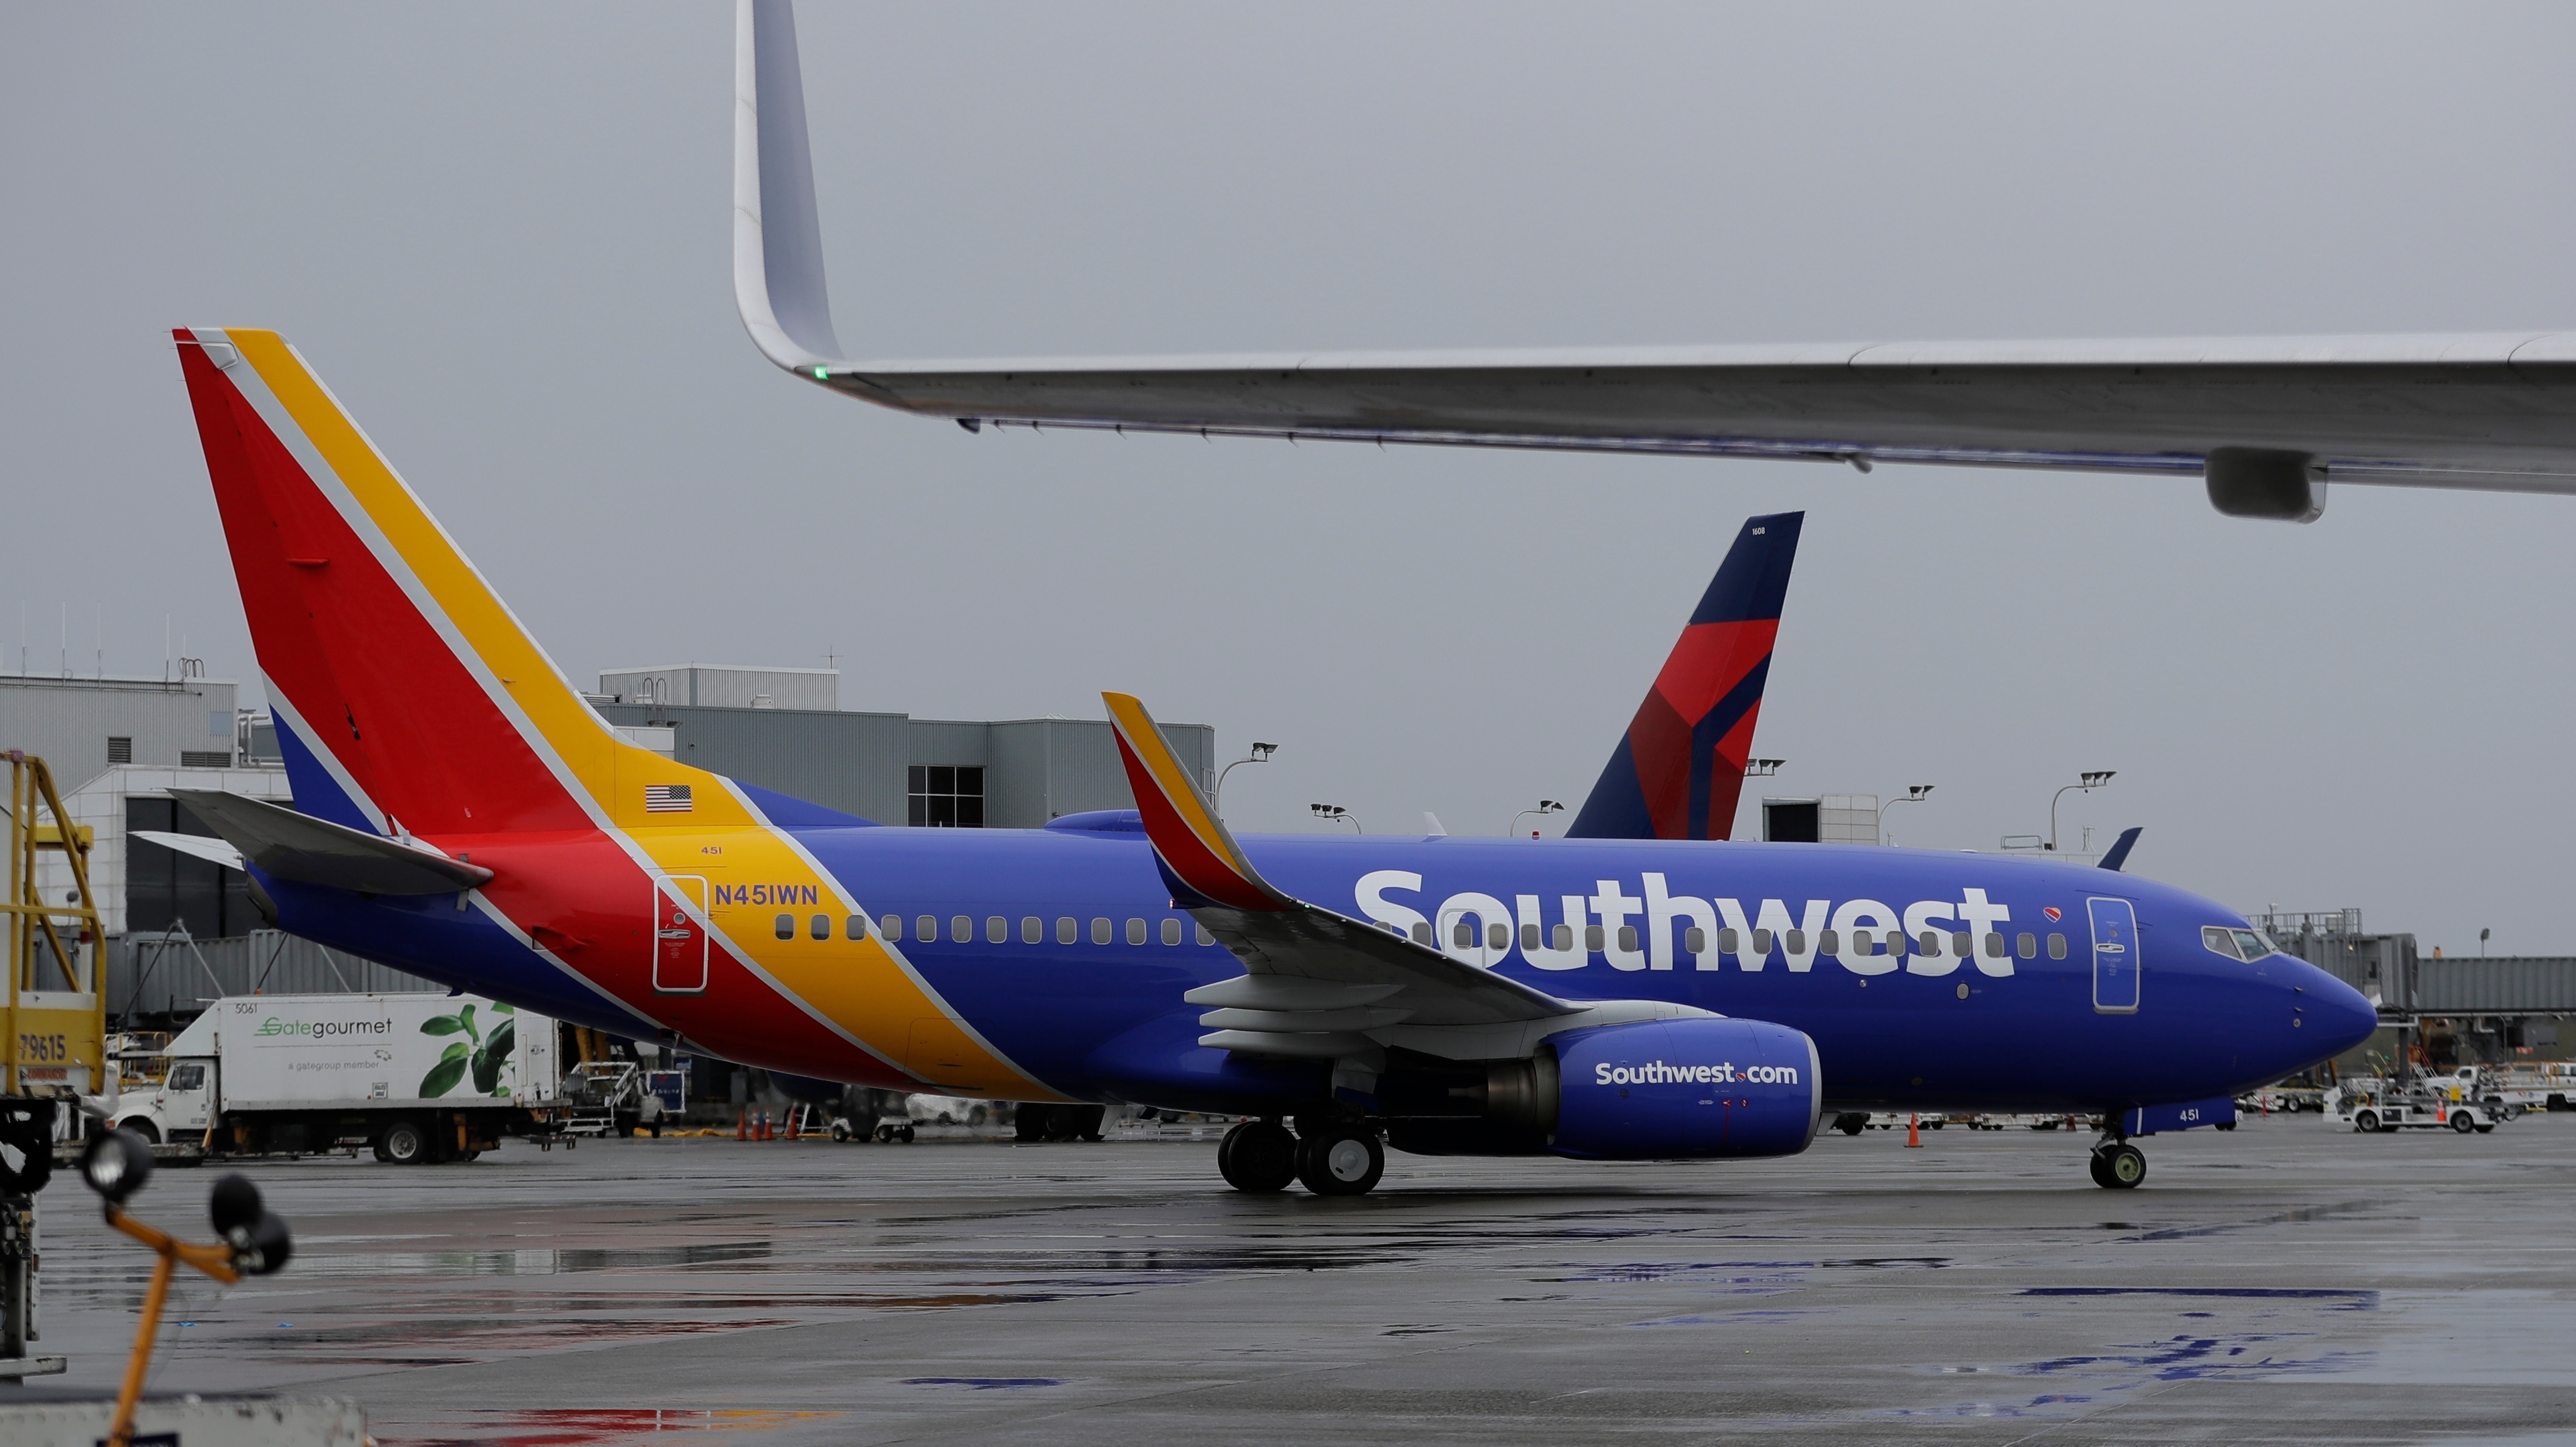 A Southwest plane taxis at the Seattle-Tacoma International Airport in Seattle.
